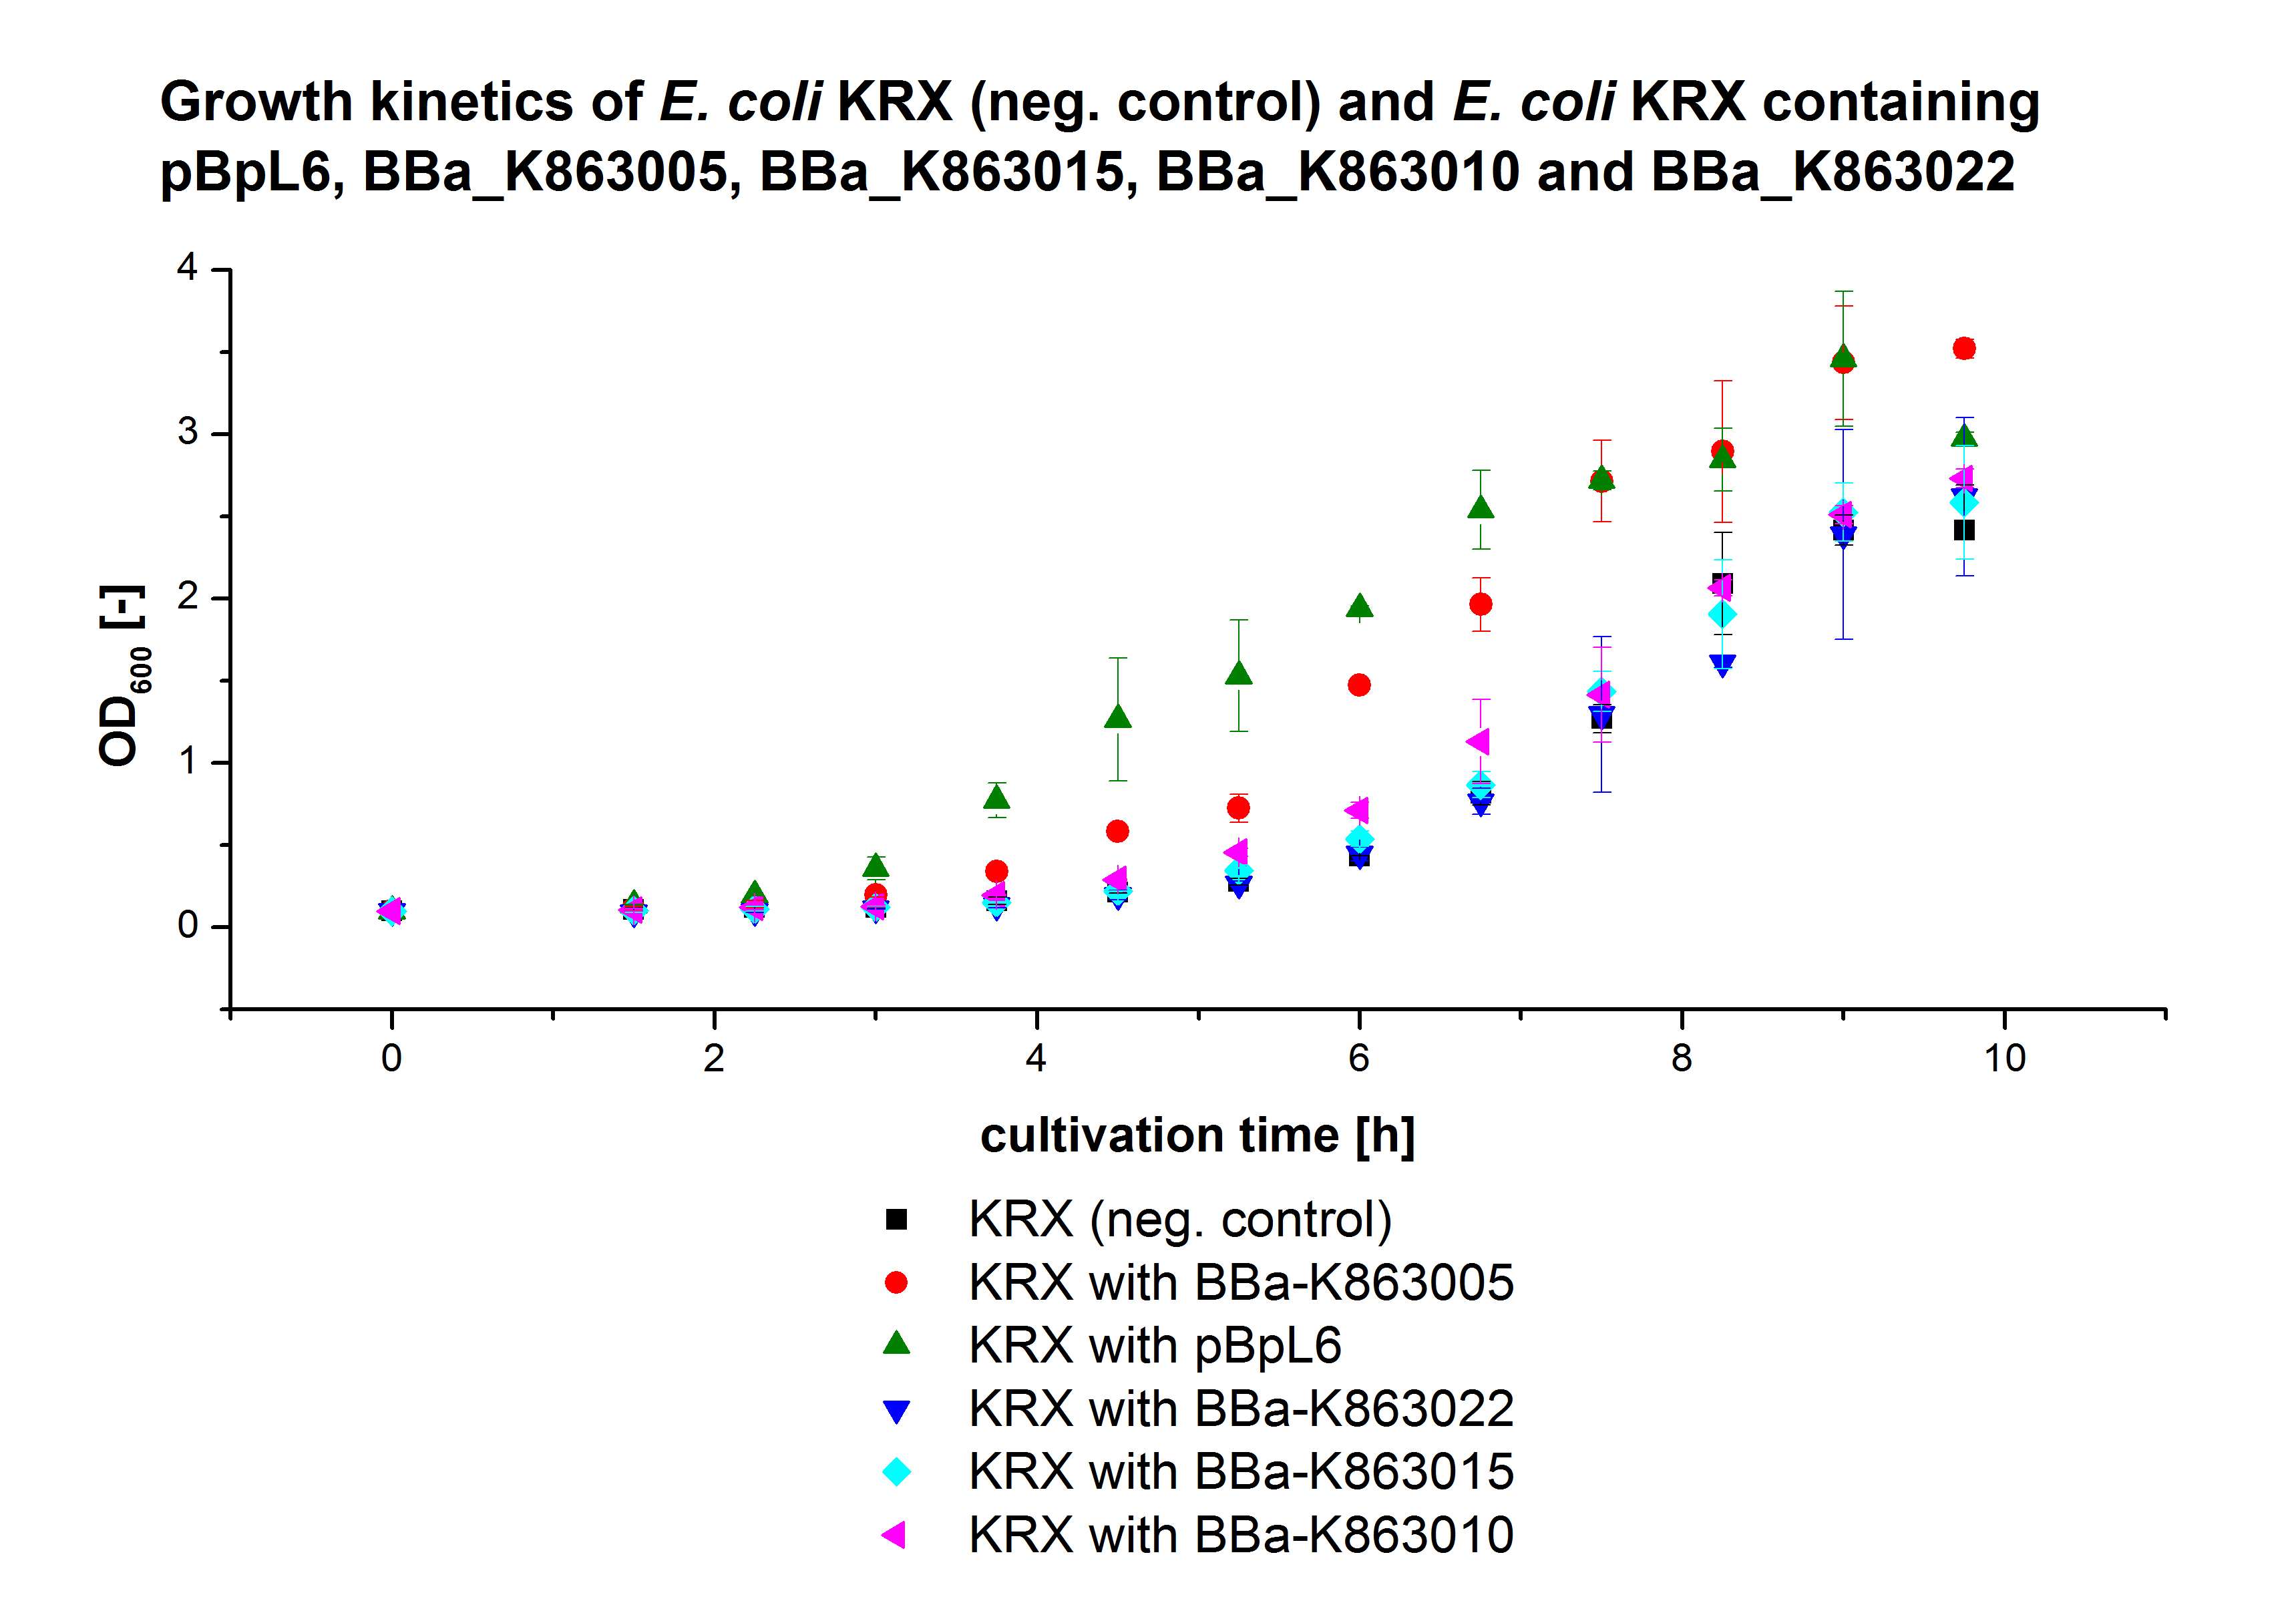 Figure X: Growth kinetics of cultivation of E. coli KRX with BBa_K863005, BBa_K863020, BBa_K863010, BBa_K863015 and pBpL6.